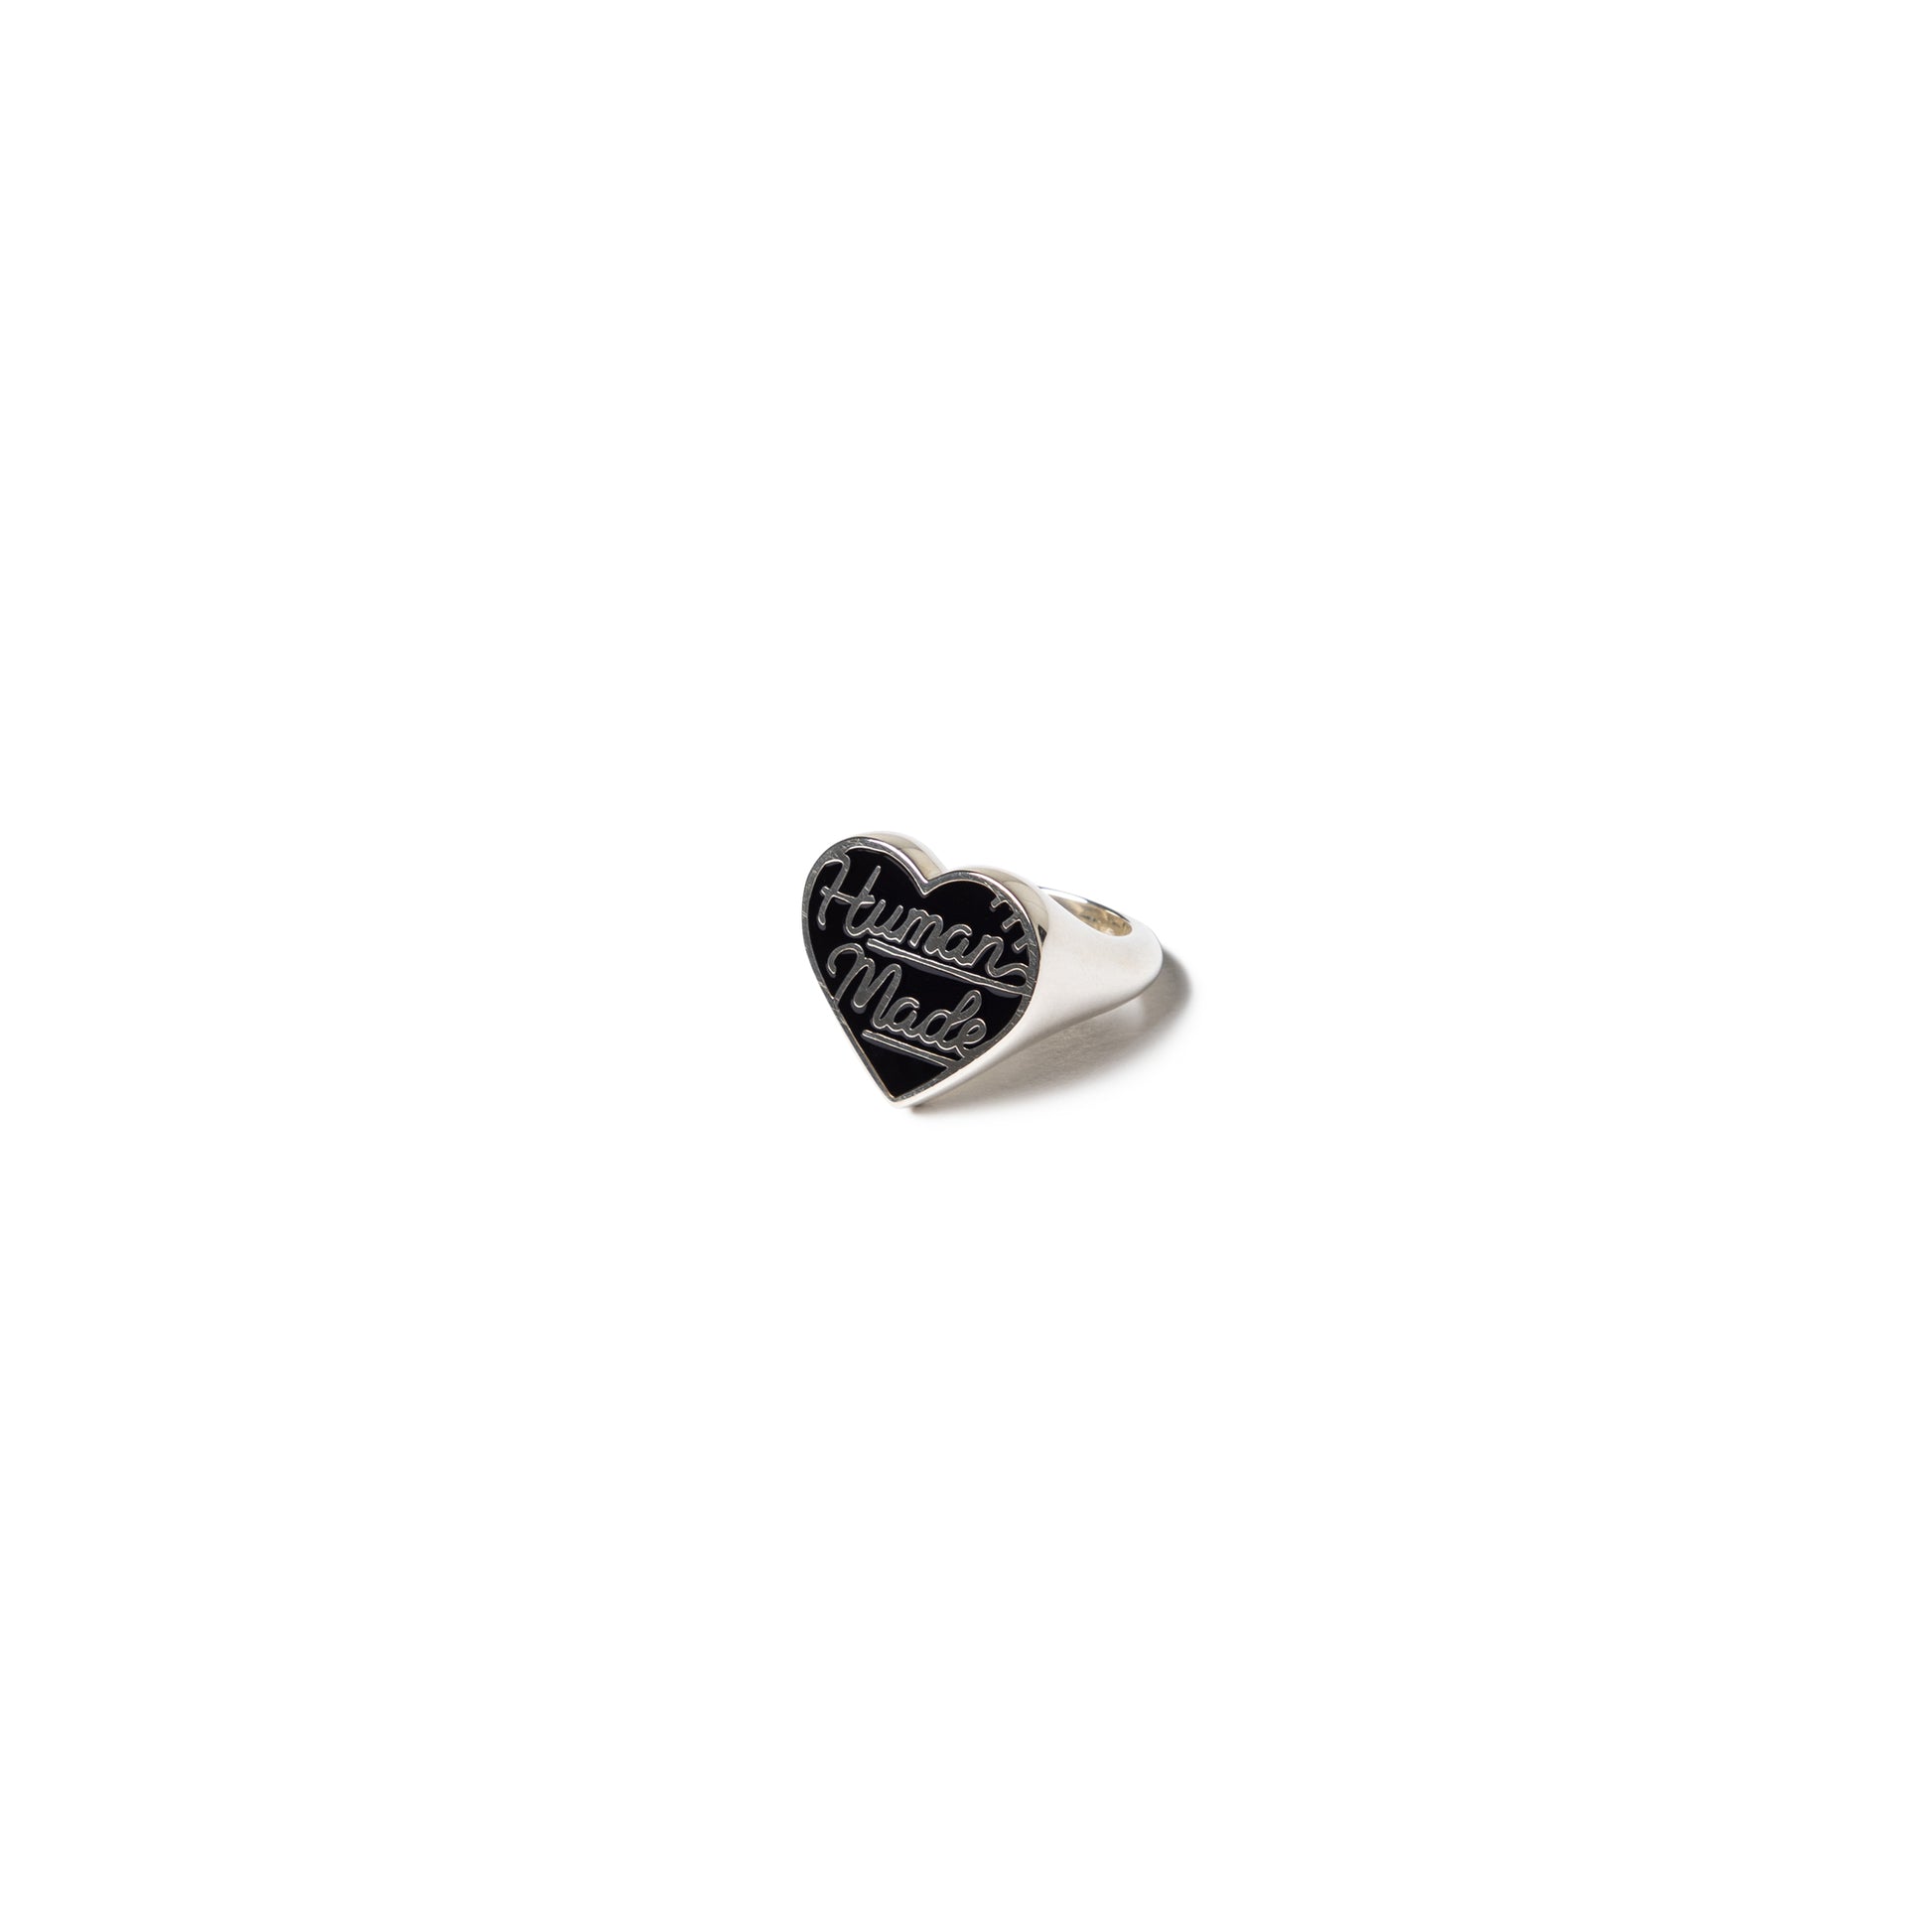 HUMAN MADE HEART SILVER RING BK-A